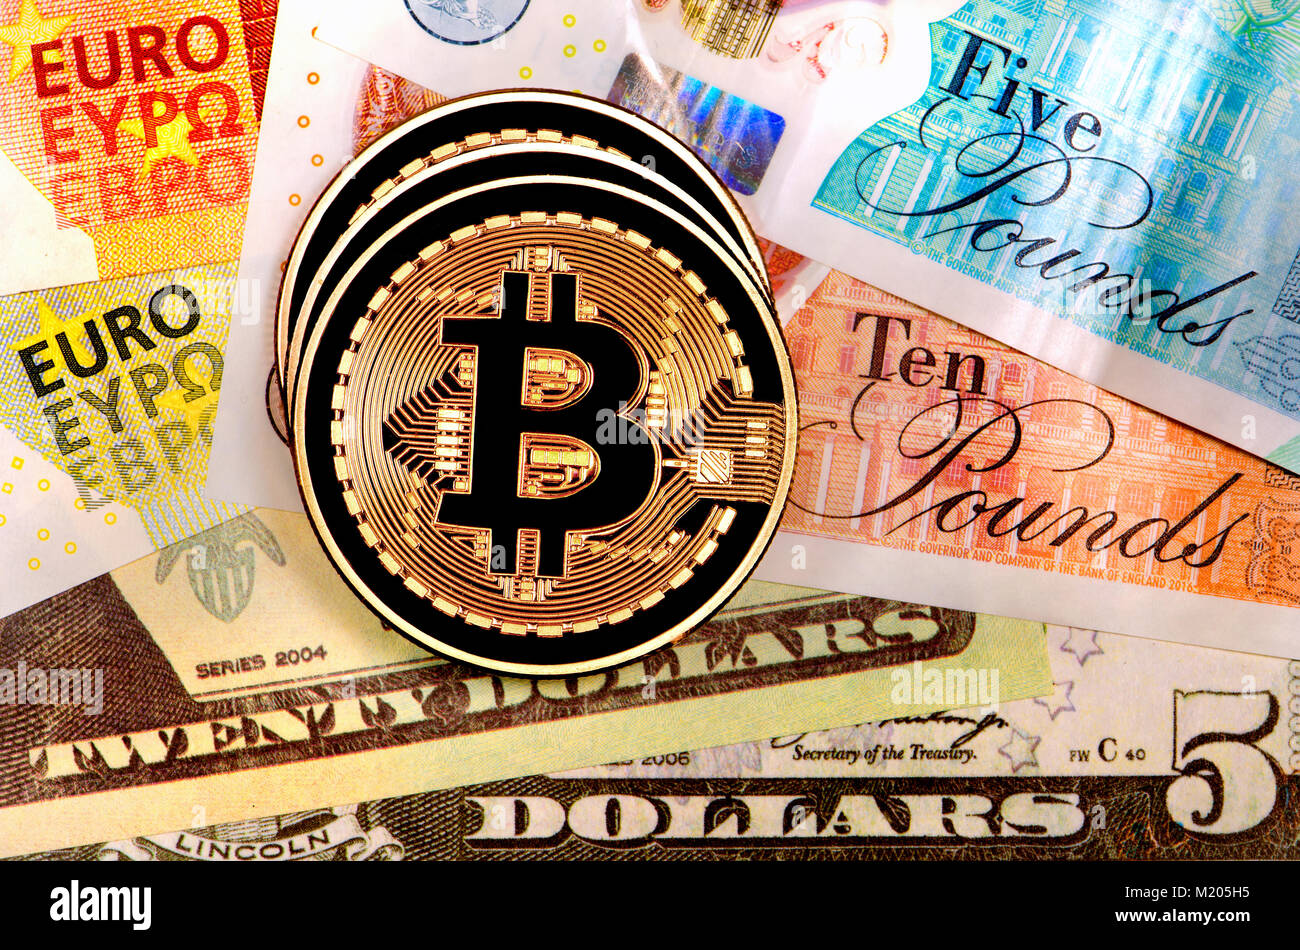 Bitcoin cryptocurrency / payment system (Copper Bitcoin Commemorative Round .999 bullion) Electronic currency with Dollars Pounds and Euros. Digitaly  Stock Photo